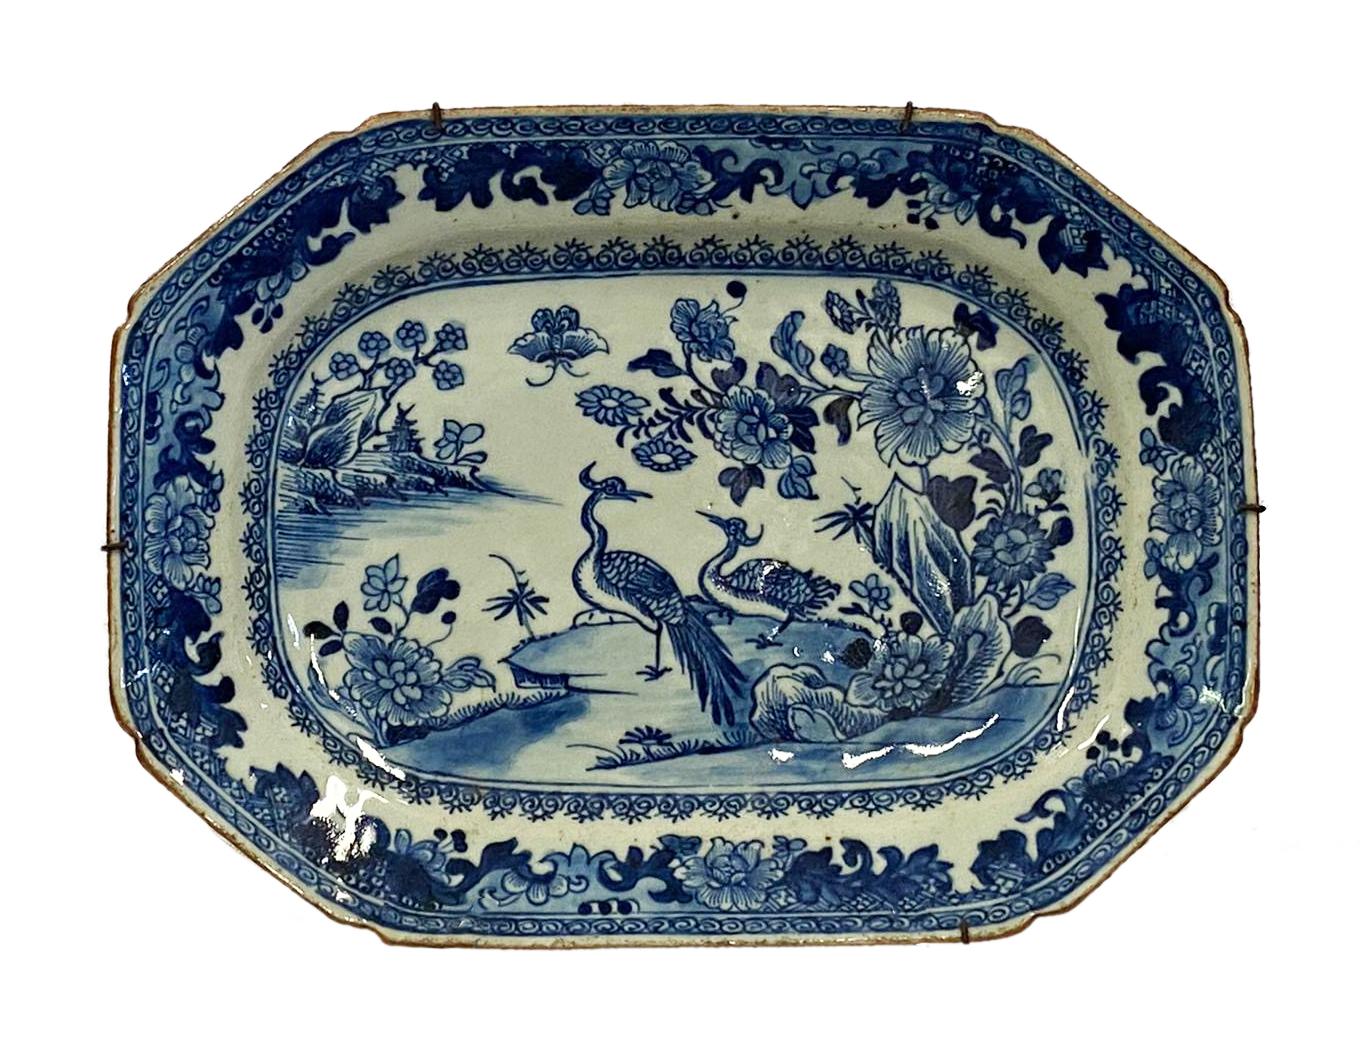 A good quality pair of late 18th century Chinese blue and white Nanking platers, each with wonderful blue ground, depicting classical scenes of exotic birds and flowers by the side of a lake, boarders to each plate with scrolling foliate decoration.